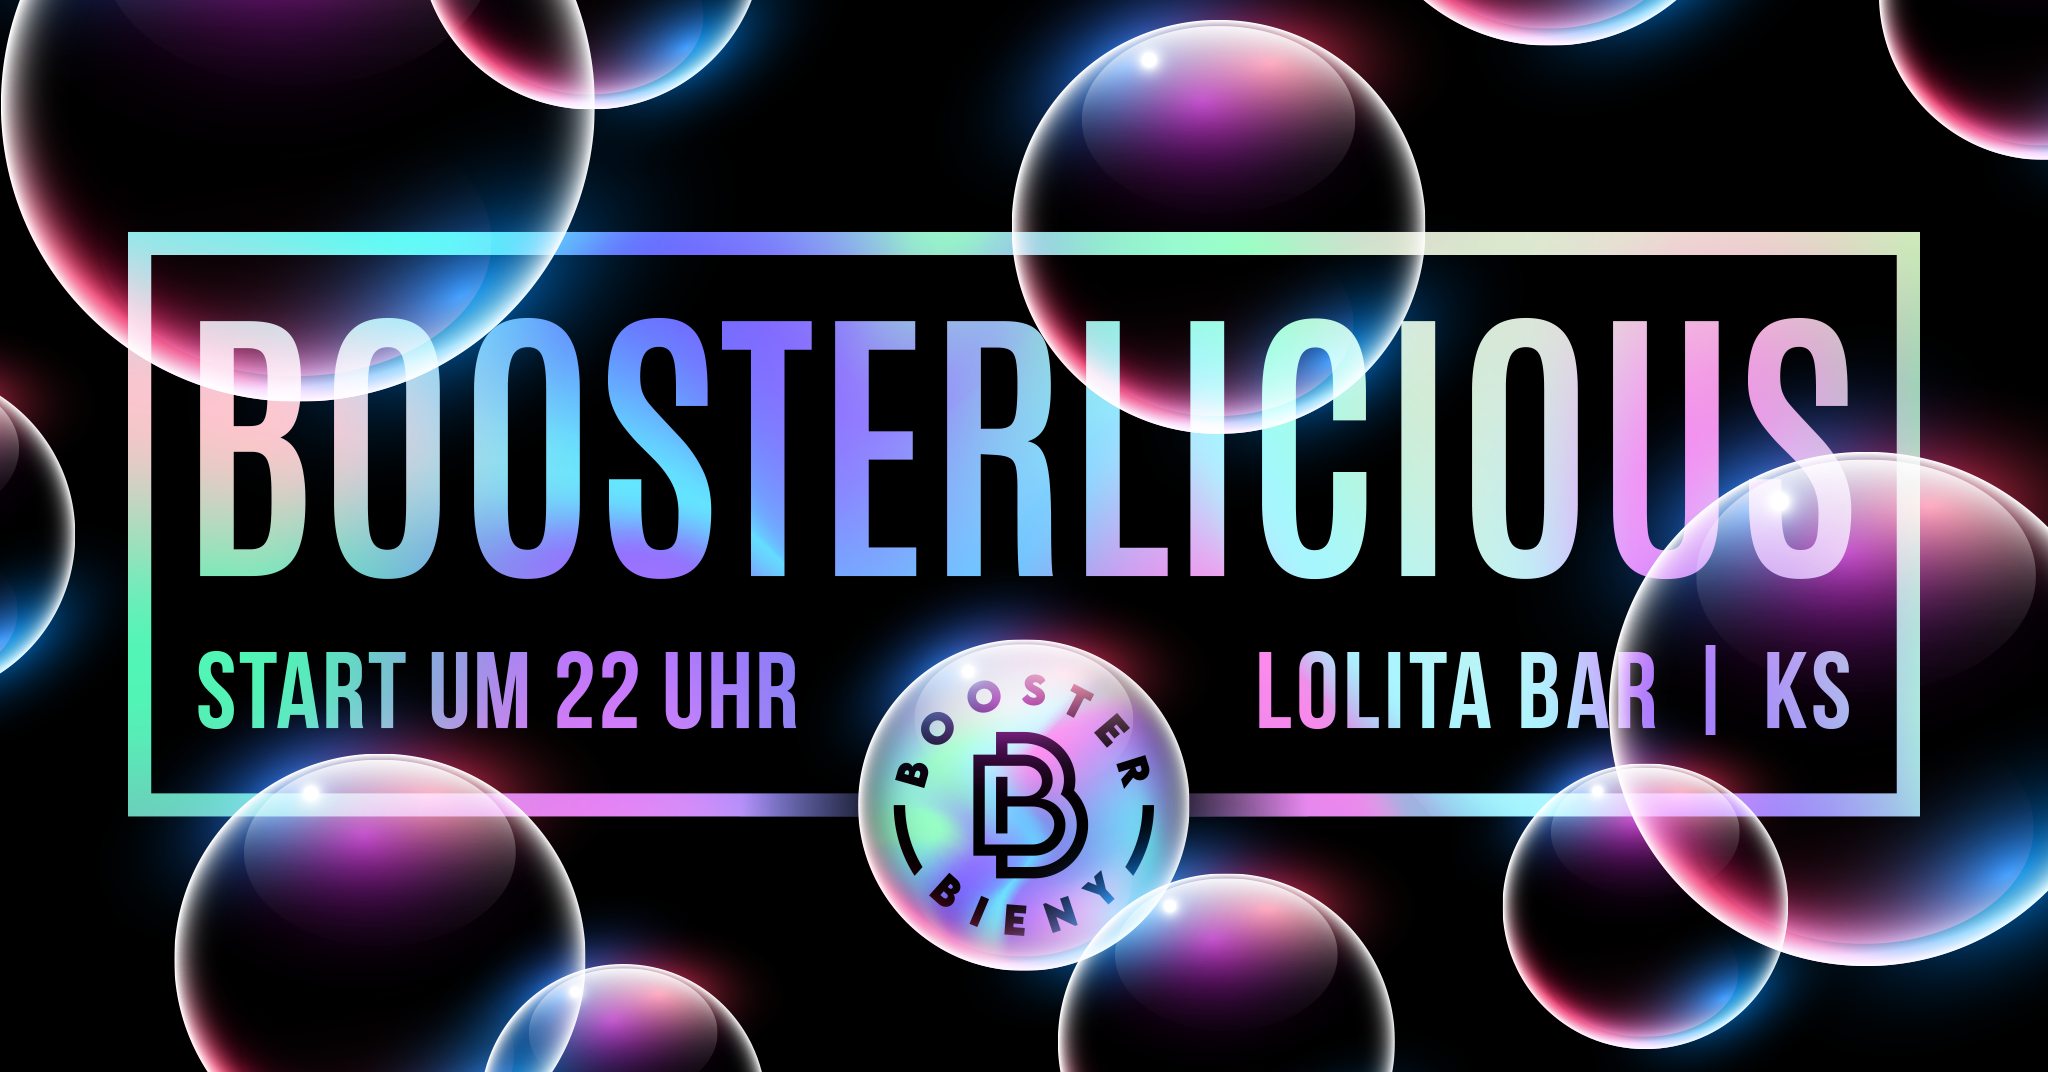 You are currently viewing Boosterlicious mit DJ Booster Bieny